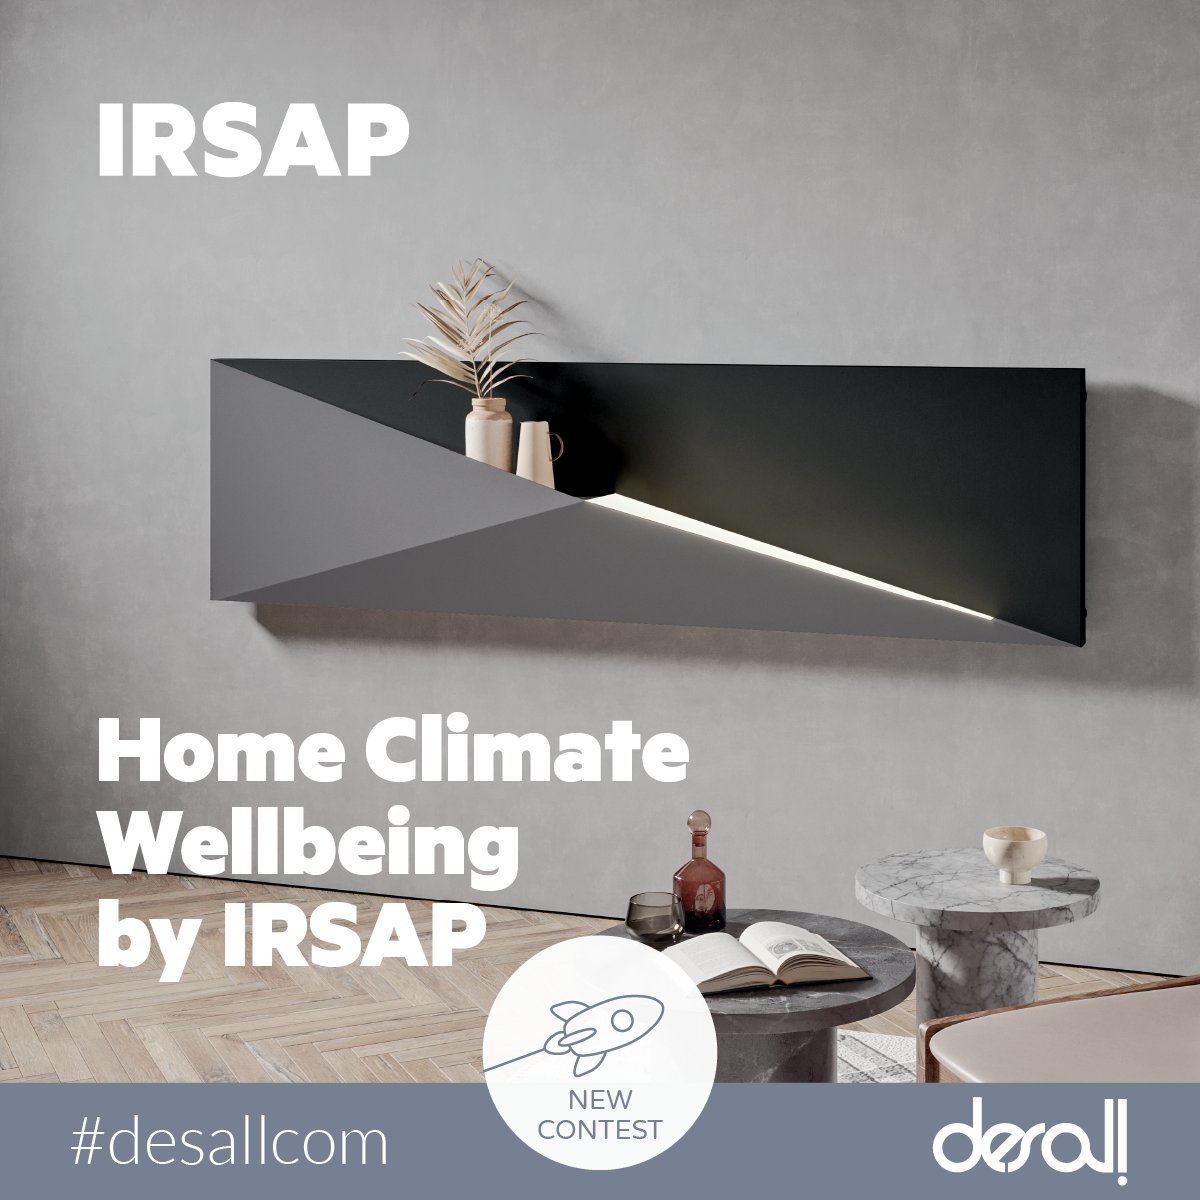 Home Climate Wellbeing by IRSAP